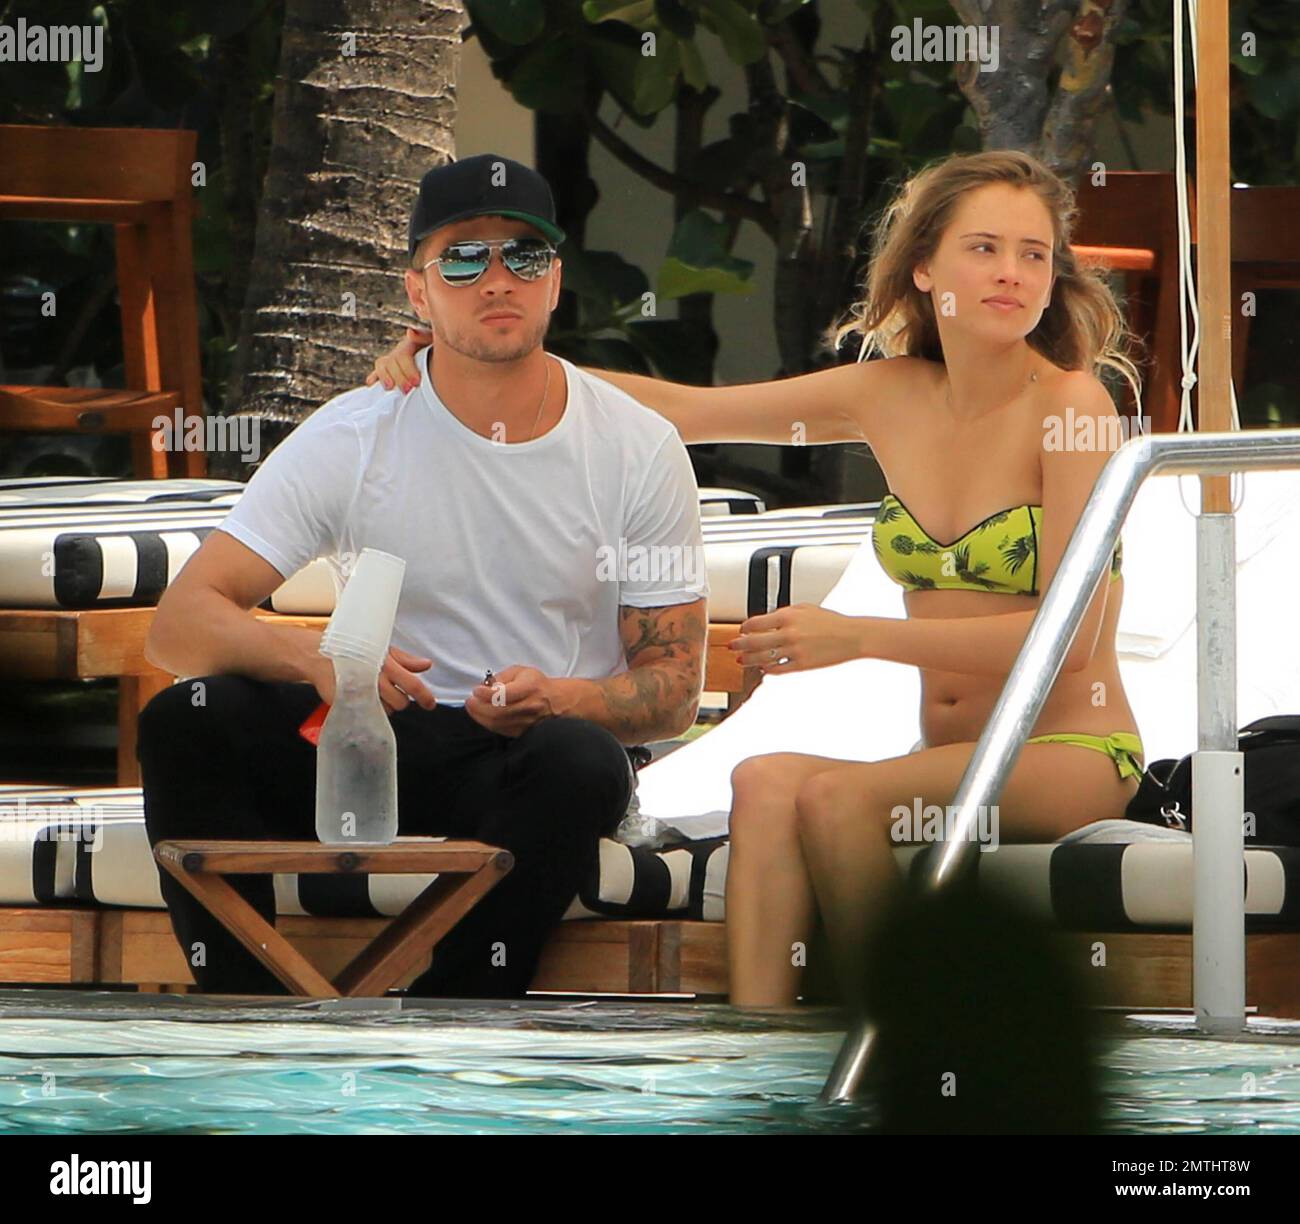 Ryan Phillippe and Paulina Slagter were spotted kissing while they hung out at their pool in South Beach. Ryan appeared to have a meeting booked as he had to leave his bikini beauty behind leaving the hotel with a back pack. Slender Paulina, who showed off a slightly rounded tummy, enjoyed a healthy lunch before cooling off in the pool in her yellow bikini. Miami Beach, FL. 11th June 2014. Stock Photo